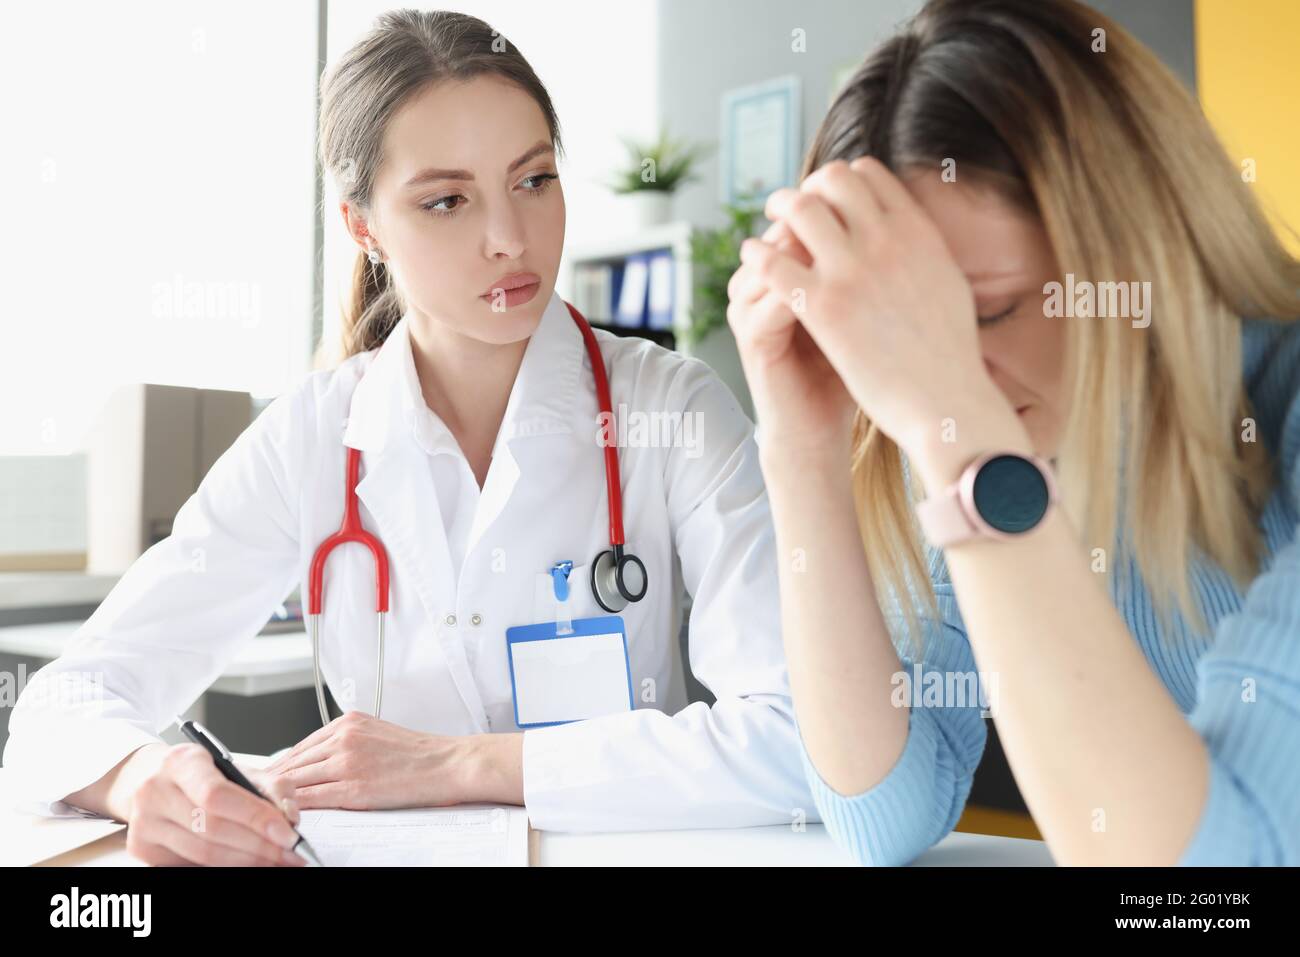 Upset and depressed woman at doctor appointment Stock Photo